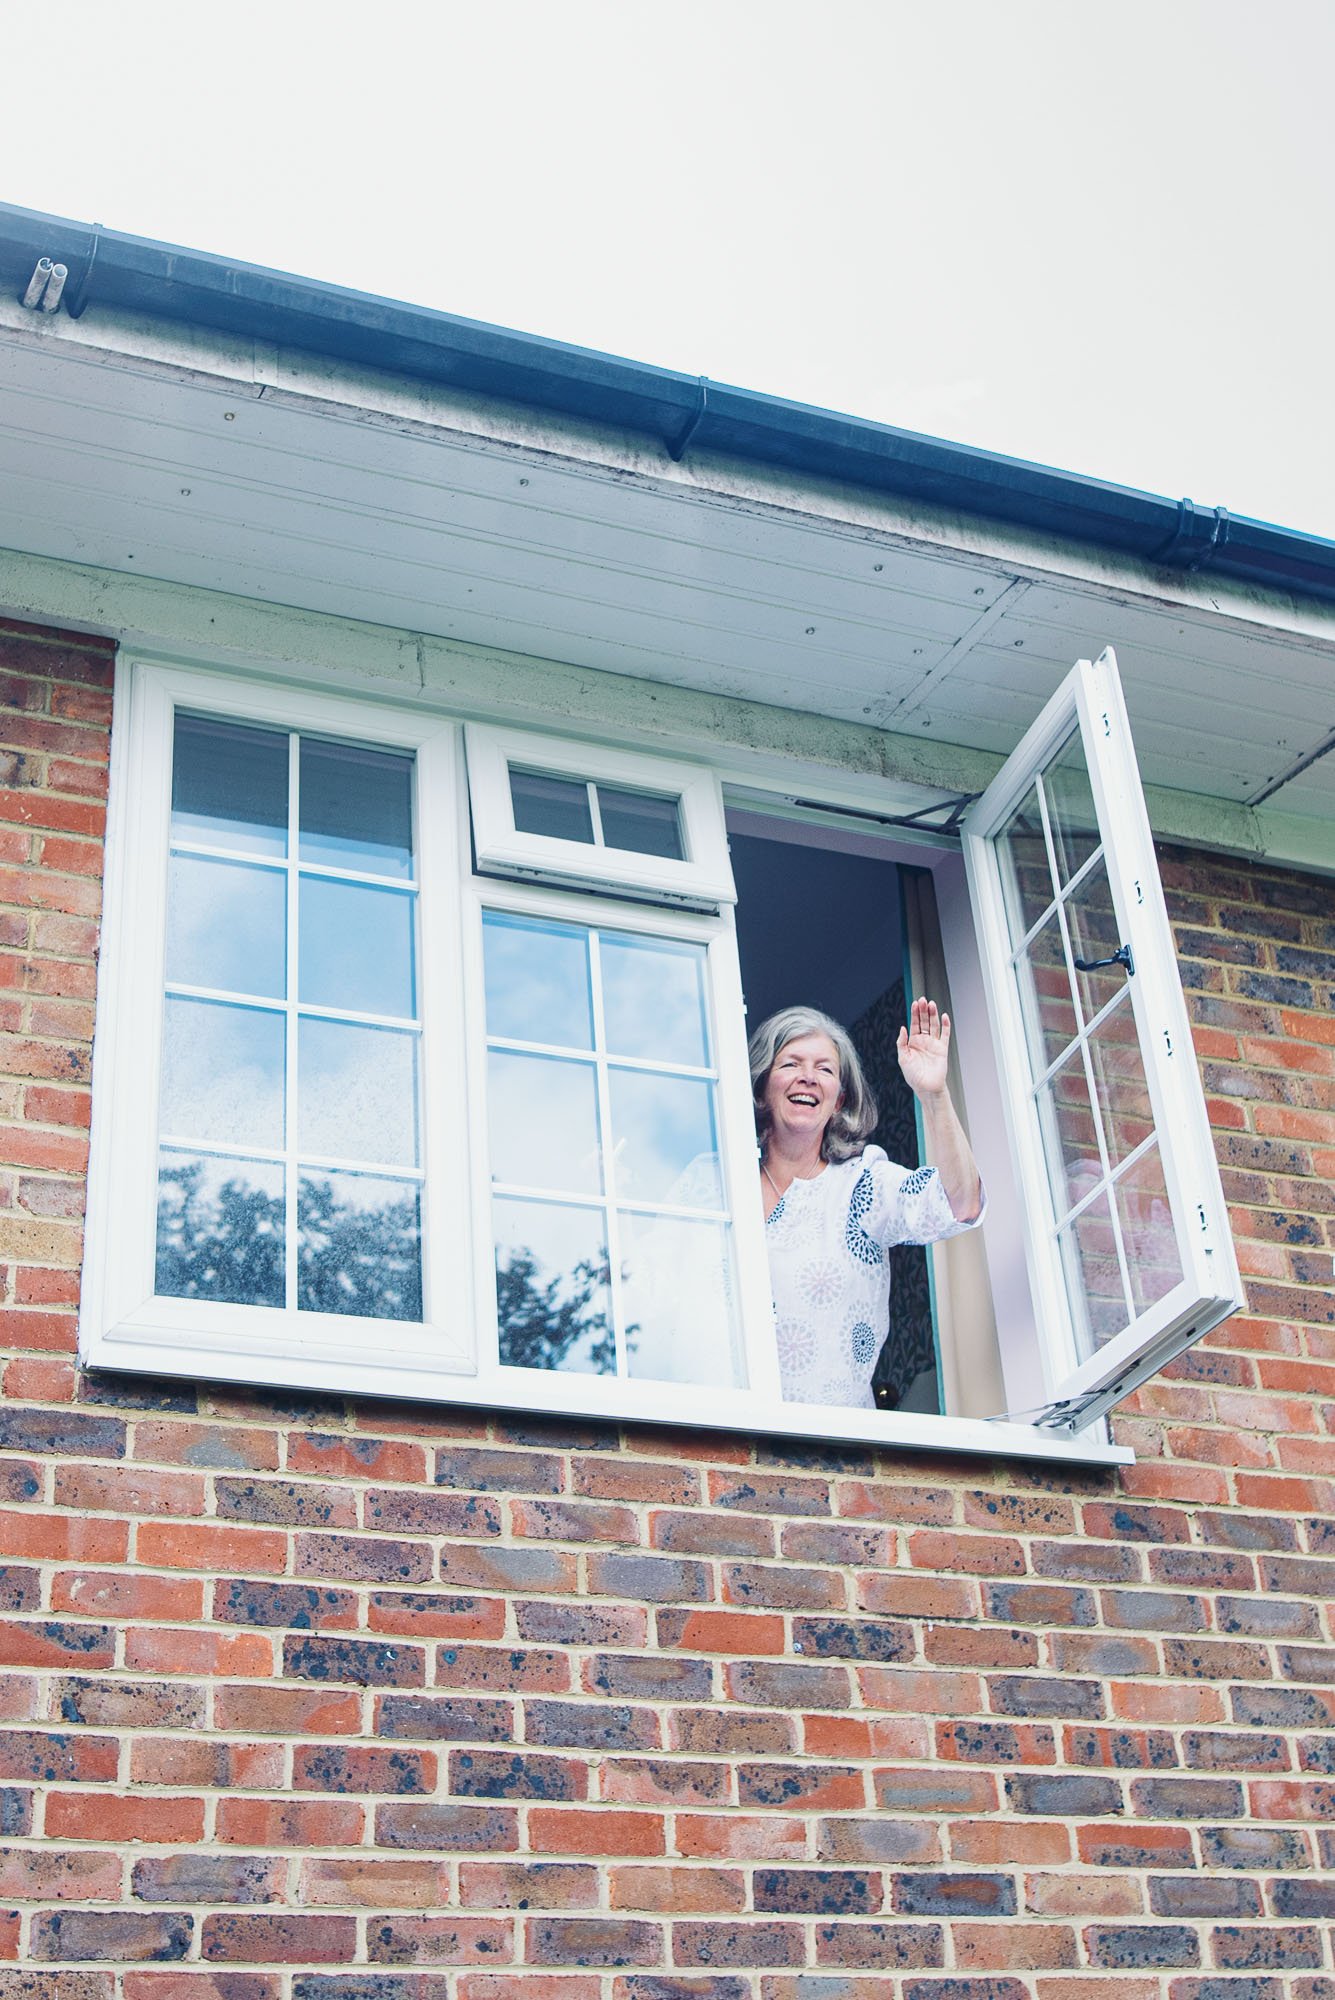 gradmother-waving-bedroom-window-during-family-documentary-photoshoot-at-home-hove-sussex.jpg